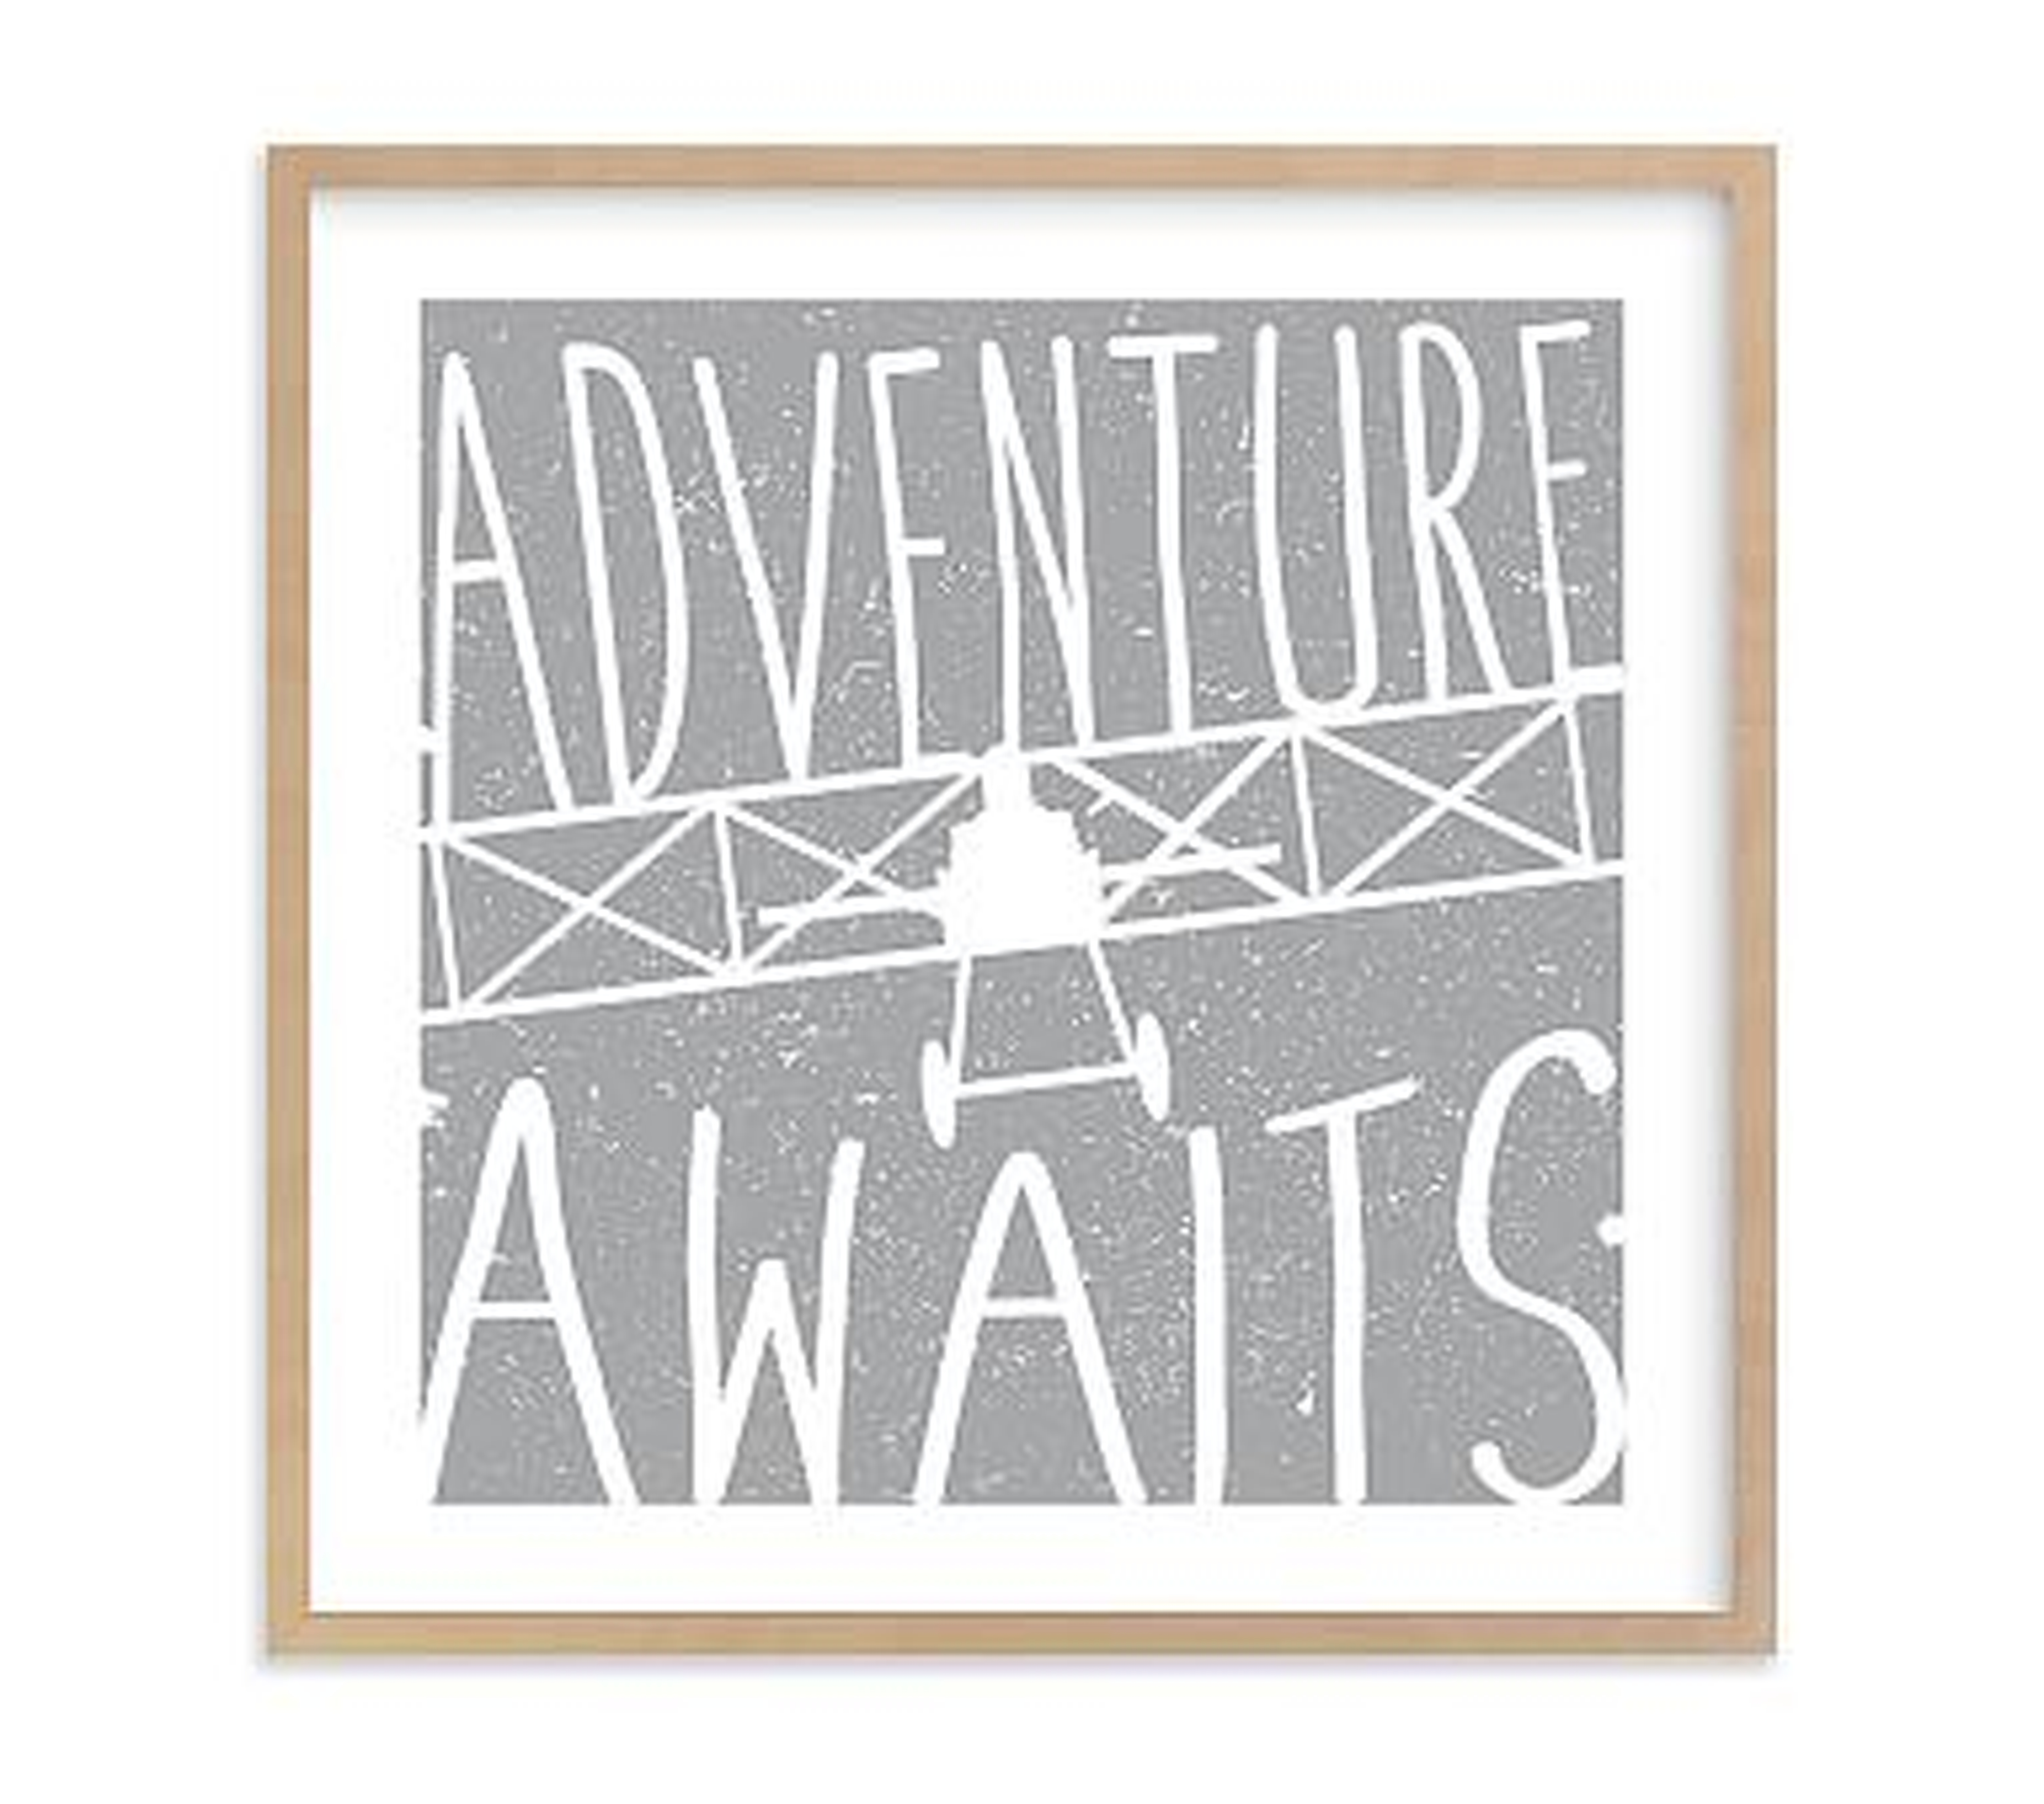 Adventure Awaits Vintage Airplane Wall Art by Minted(R), 24x24, Natural - Pottery Barn Kids